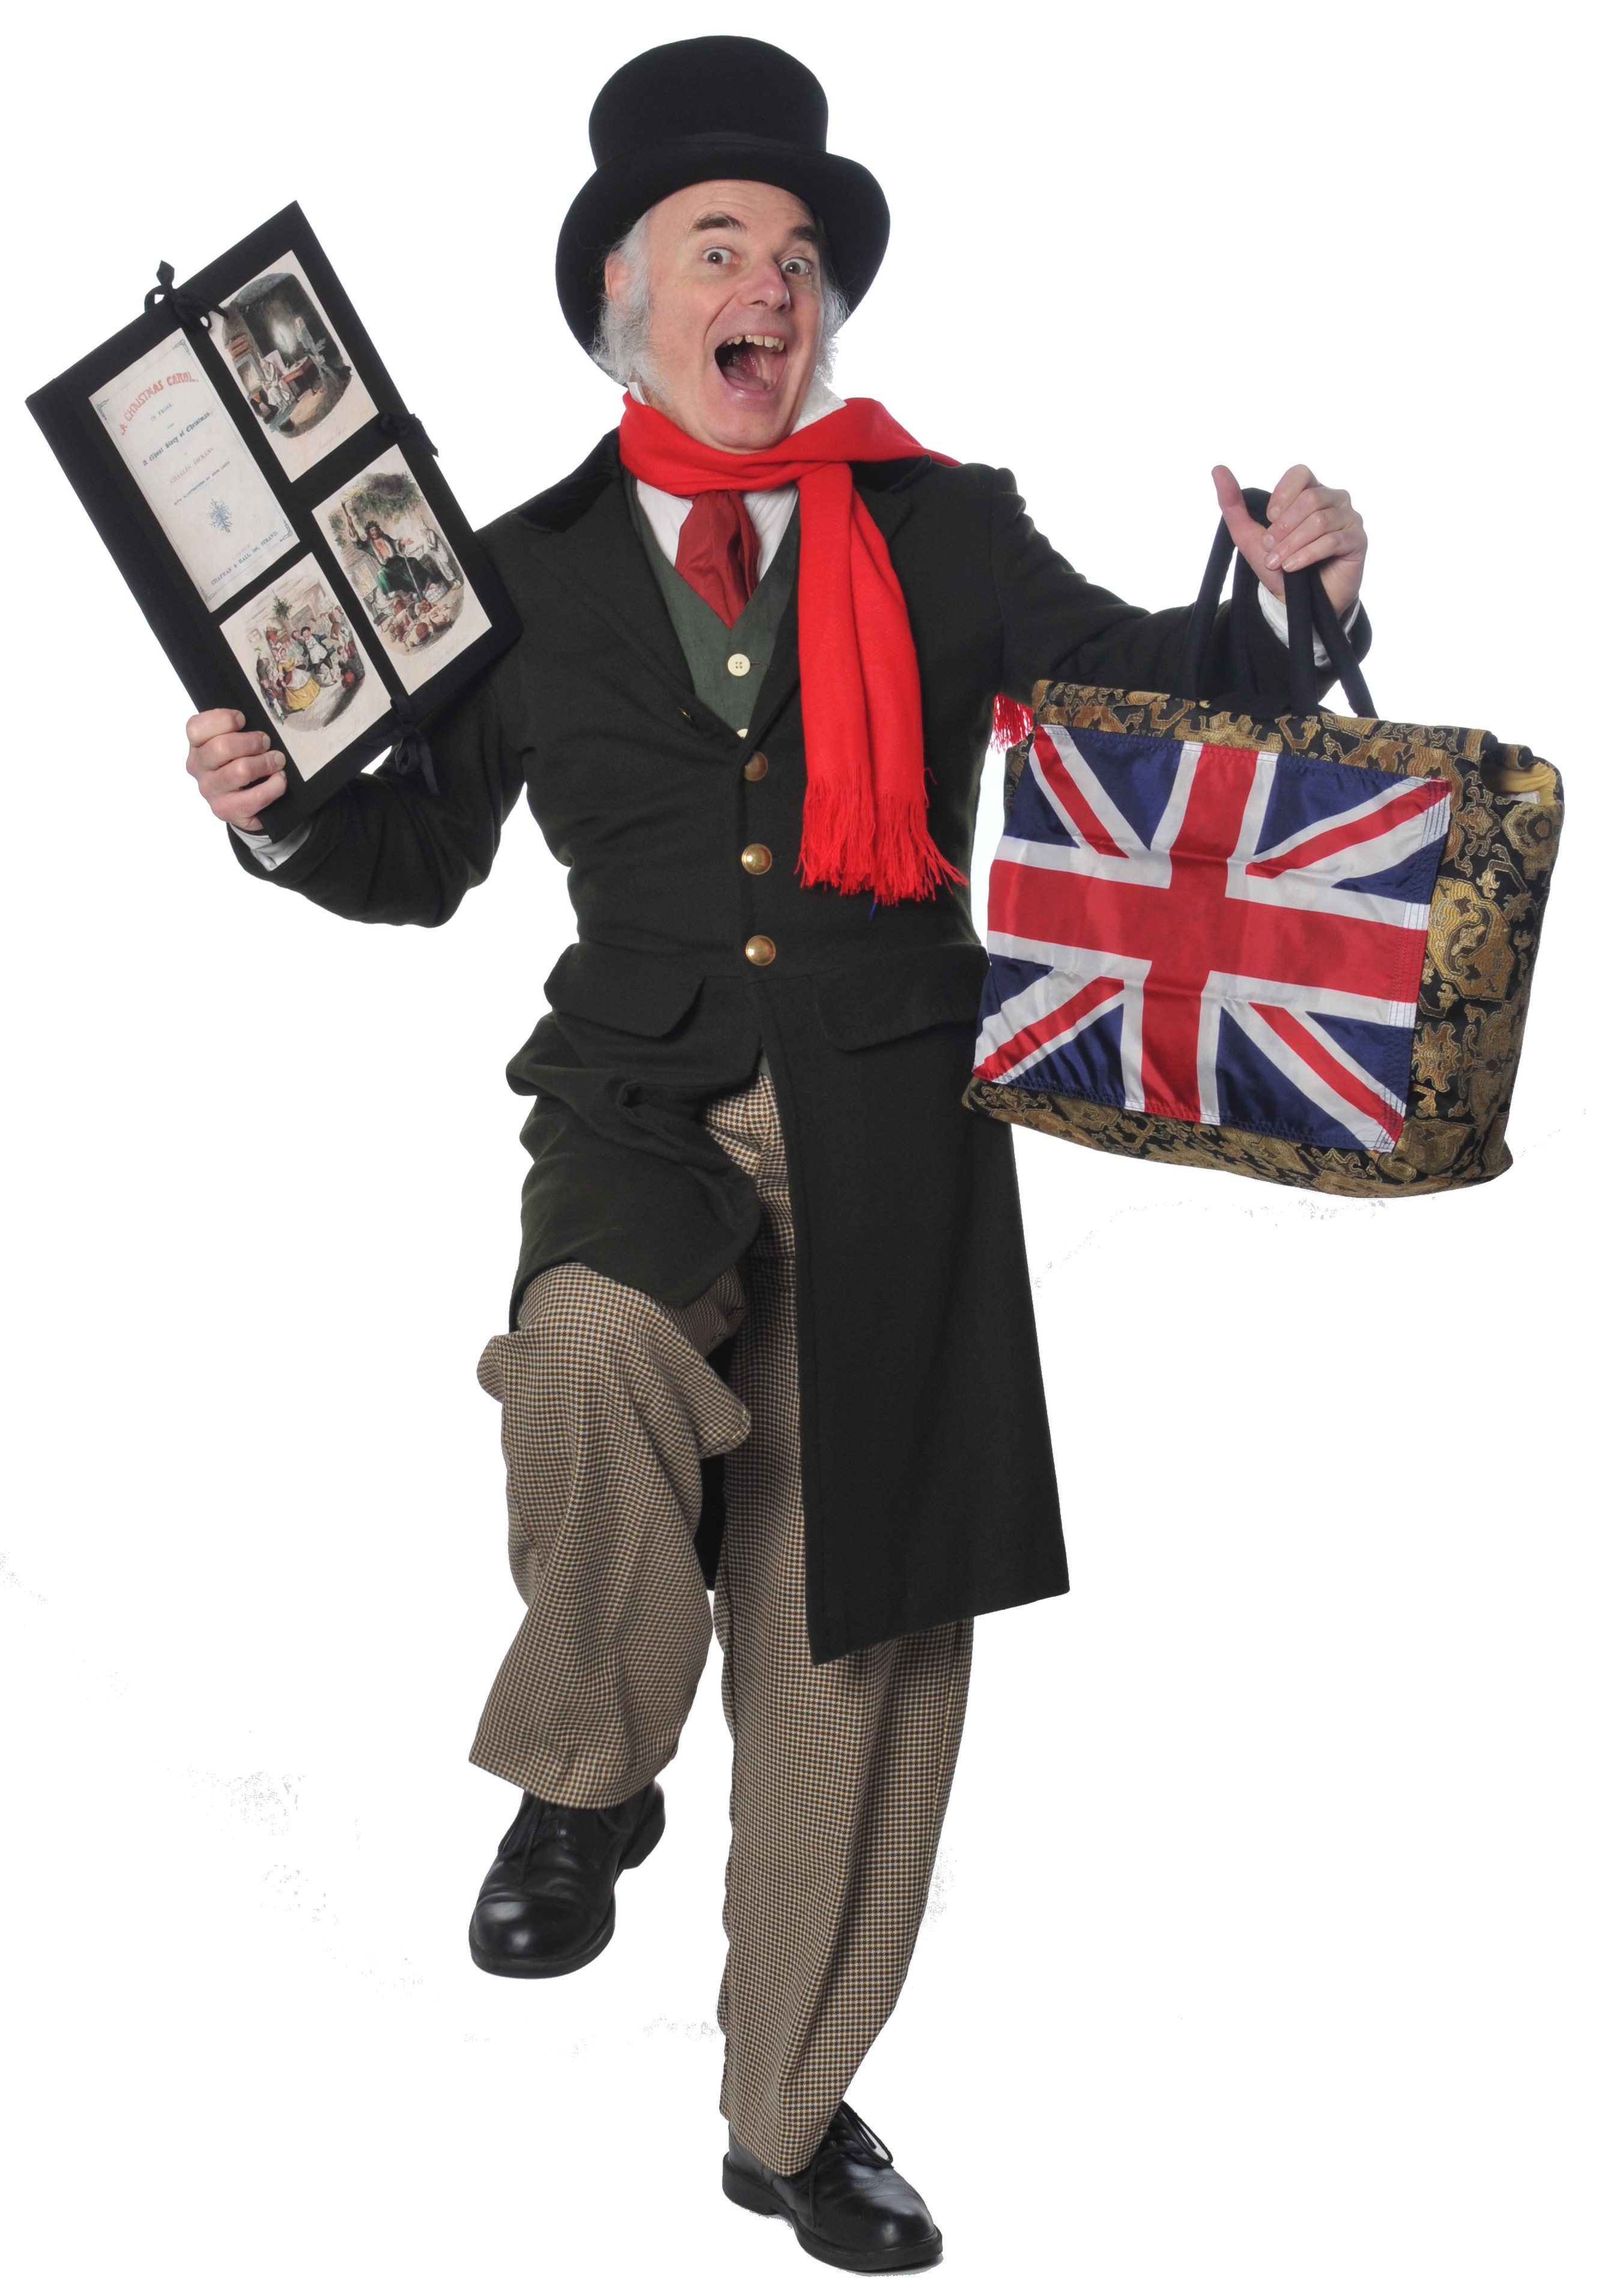 "Englishman Thomas Hutchinson" will sing and dance his way into your heart!